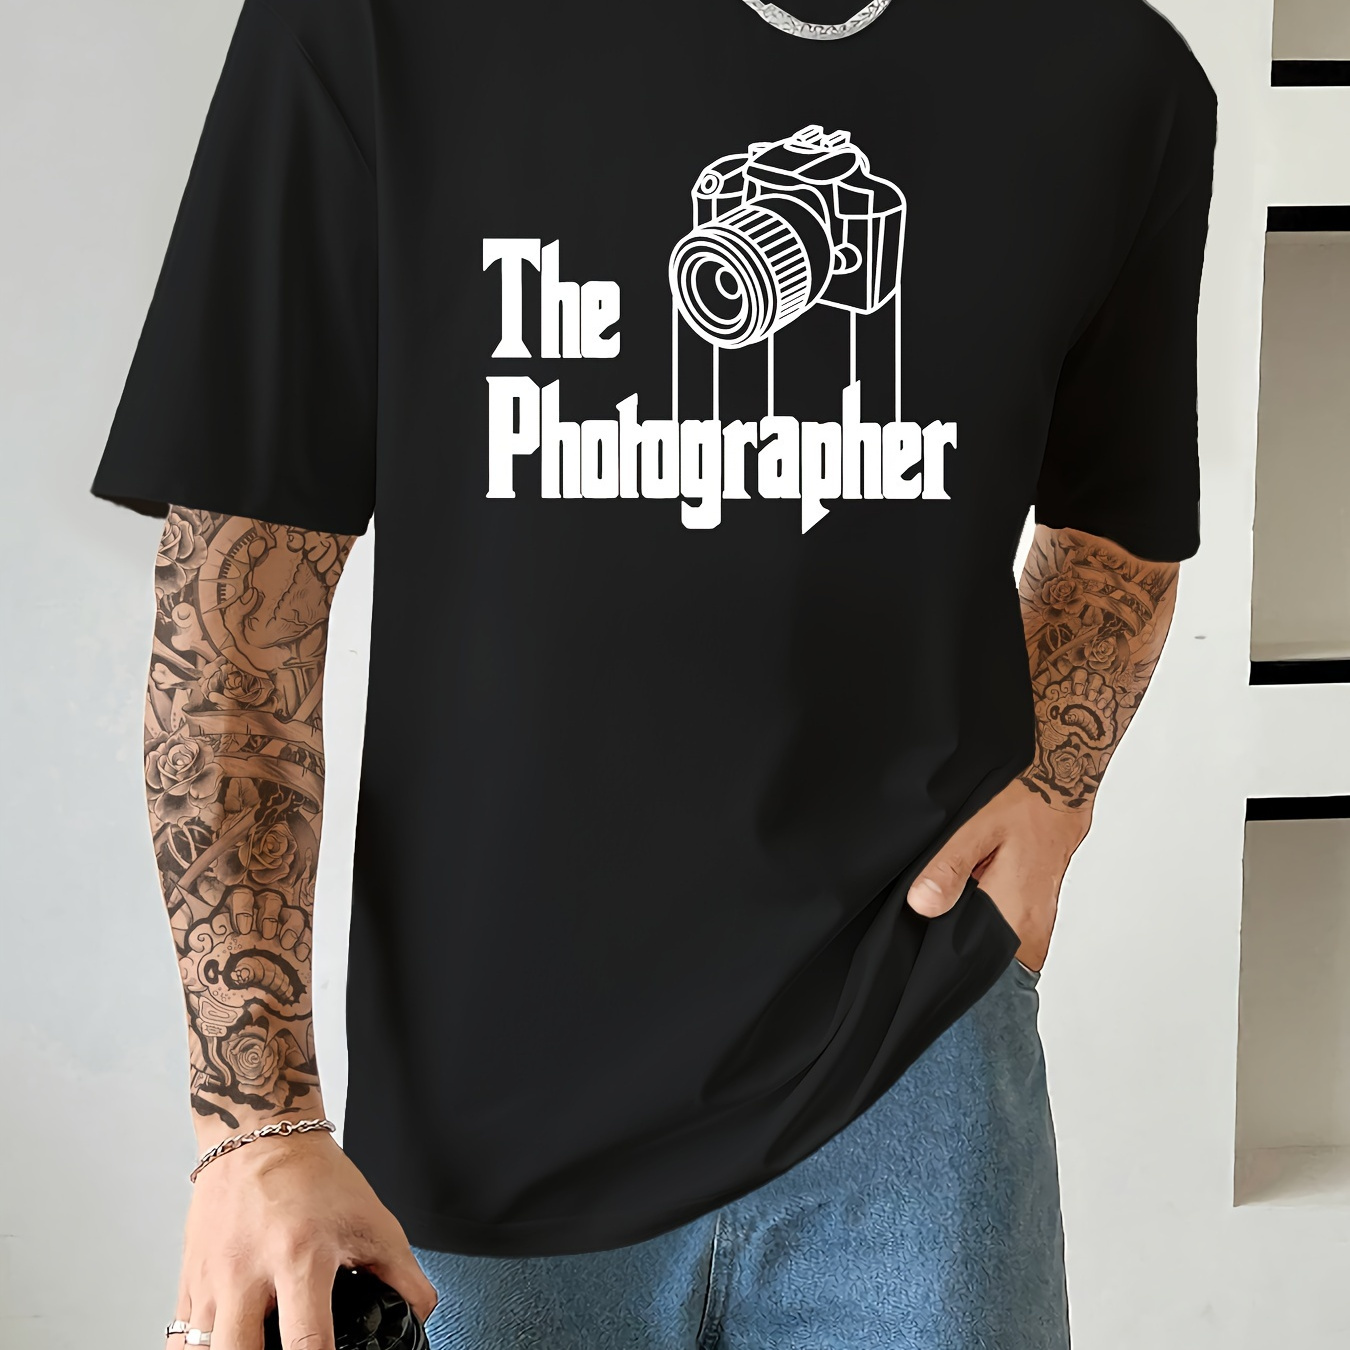 

The Photography Print, Men's Round Crew Neck Short Sleeve, Simple Style Tee Fashion Regular Fit T-shirt, Casual Comfy Breathable Top For Spring Summer Holiday Leisure Vacation Men's Clothing As Gift